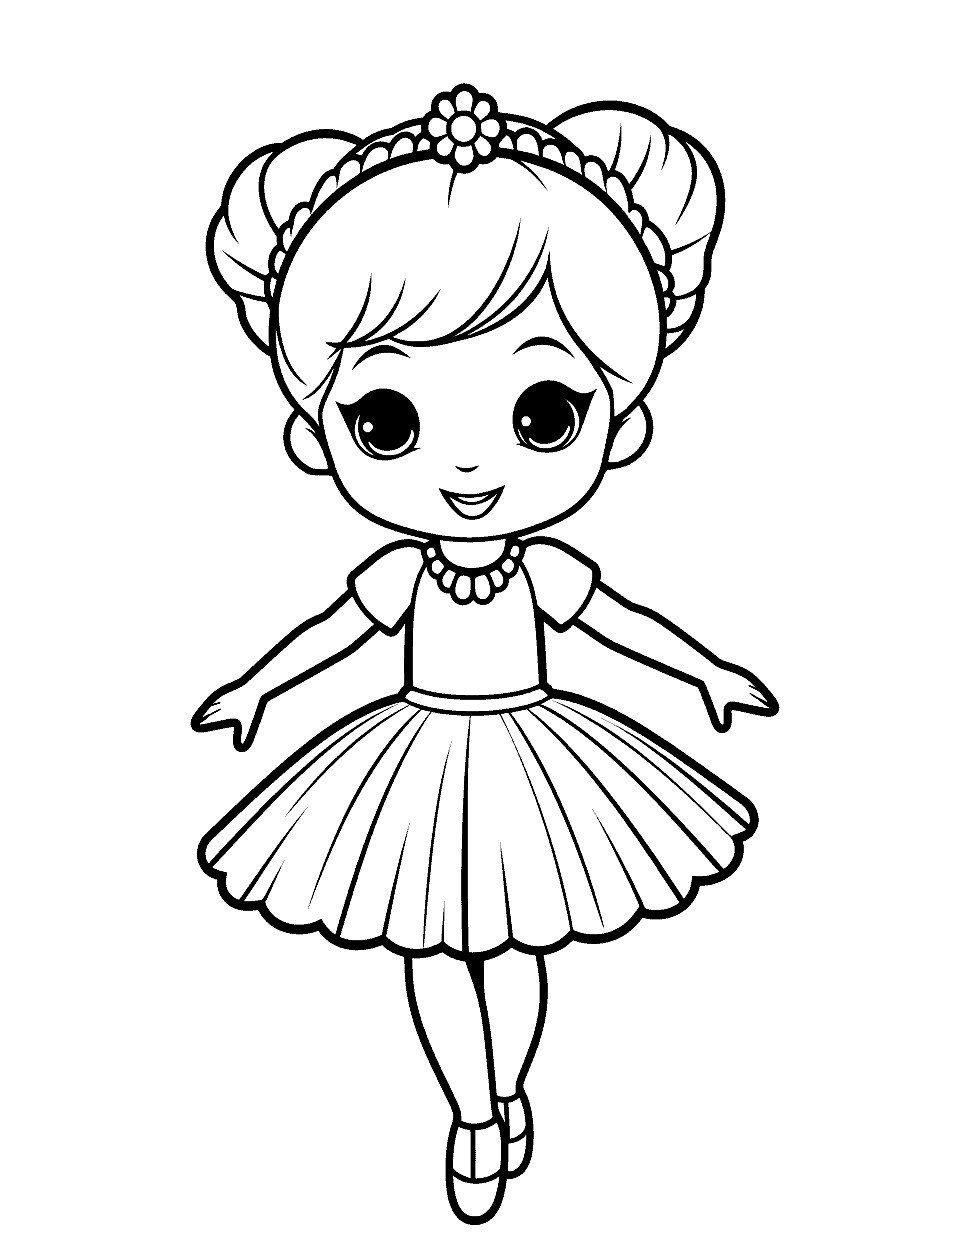 Ballet Dancer's First Recital Ballerina Coloring Page - A young ballerina excited for her first dance recital.